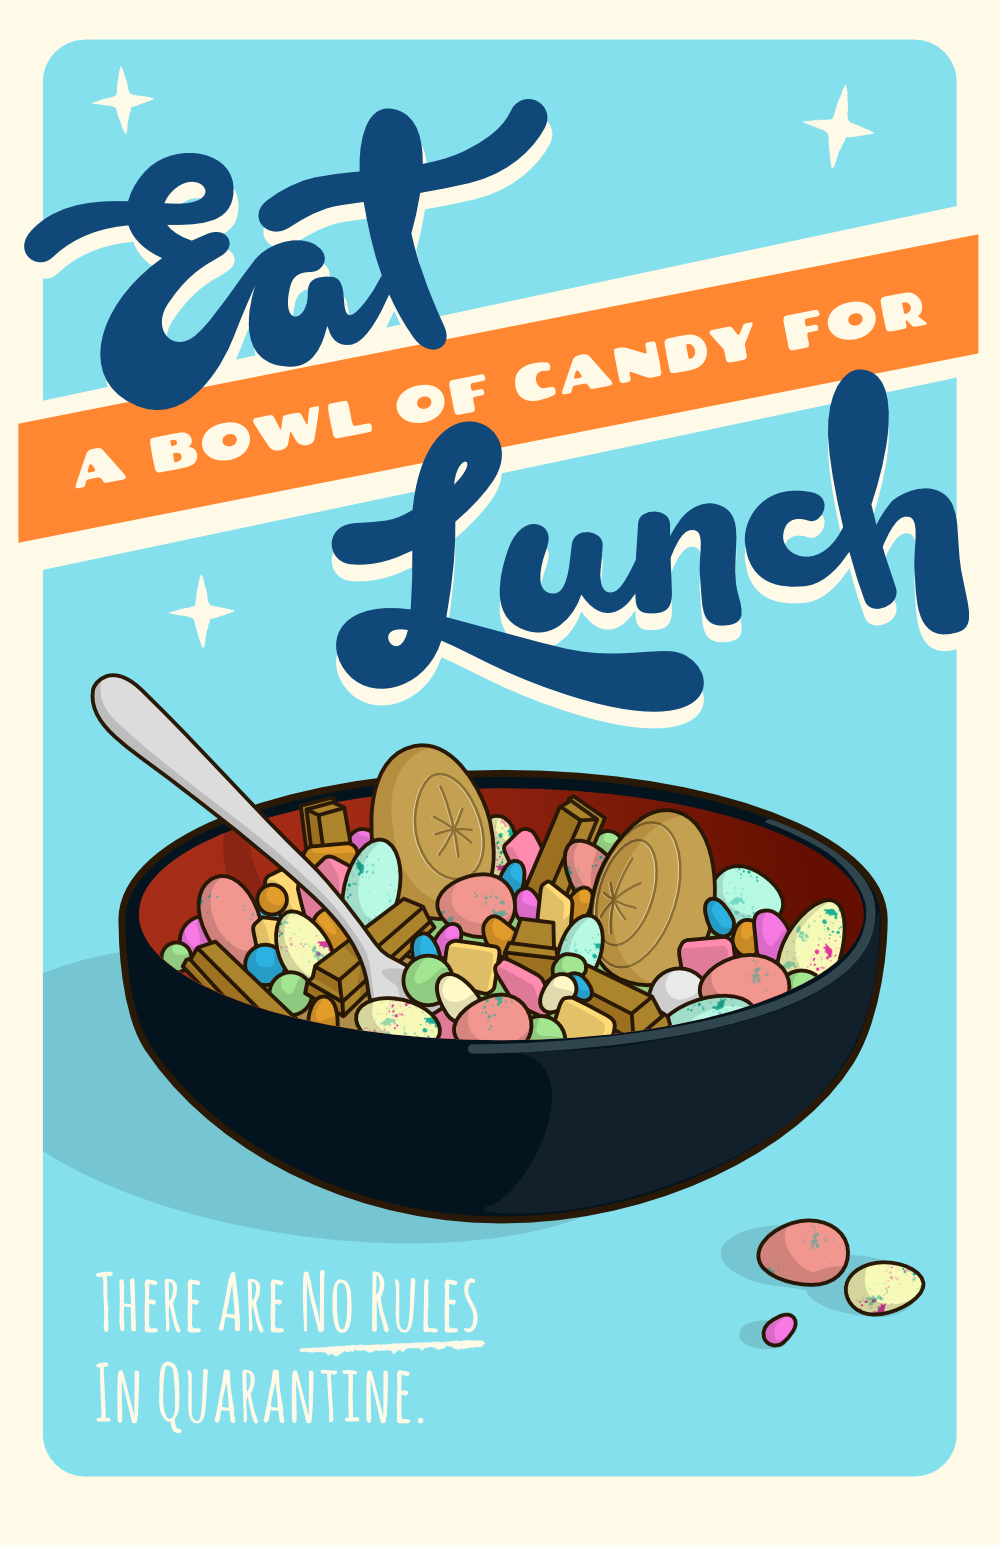 Eat a bowl of candy for lunch!